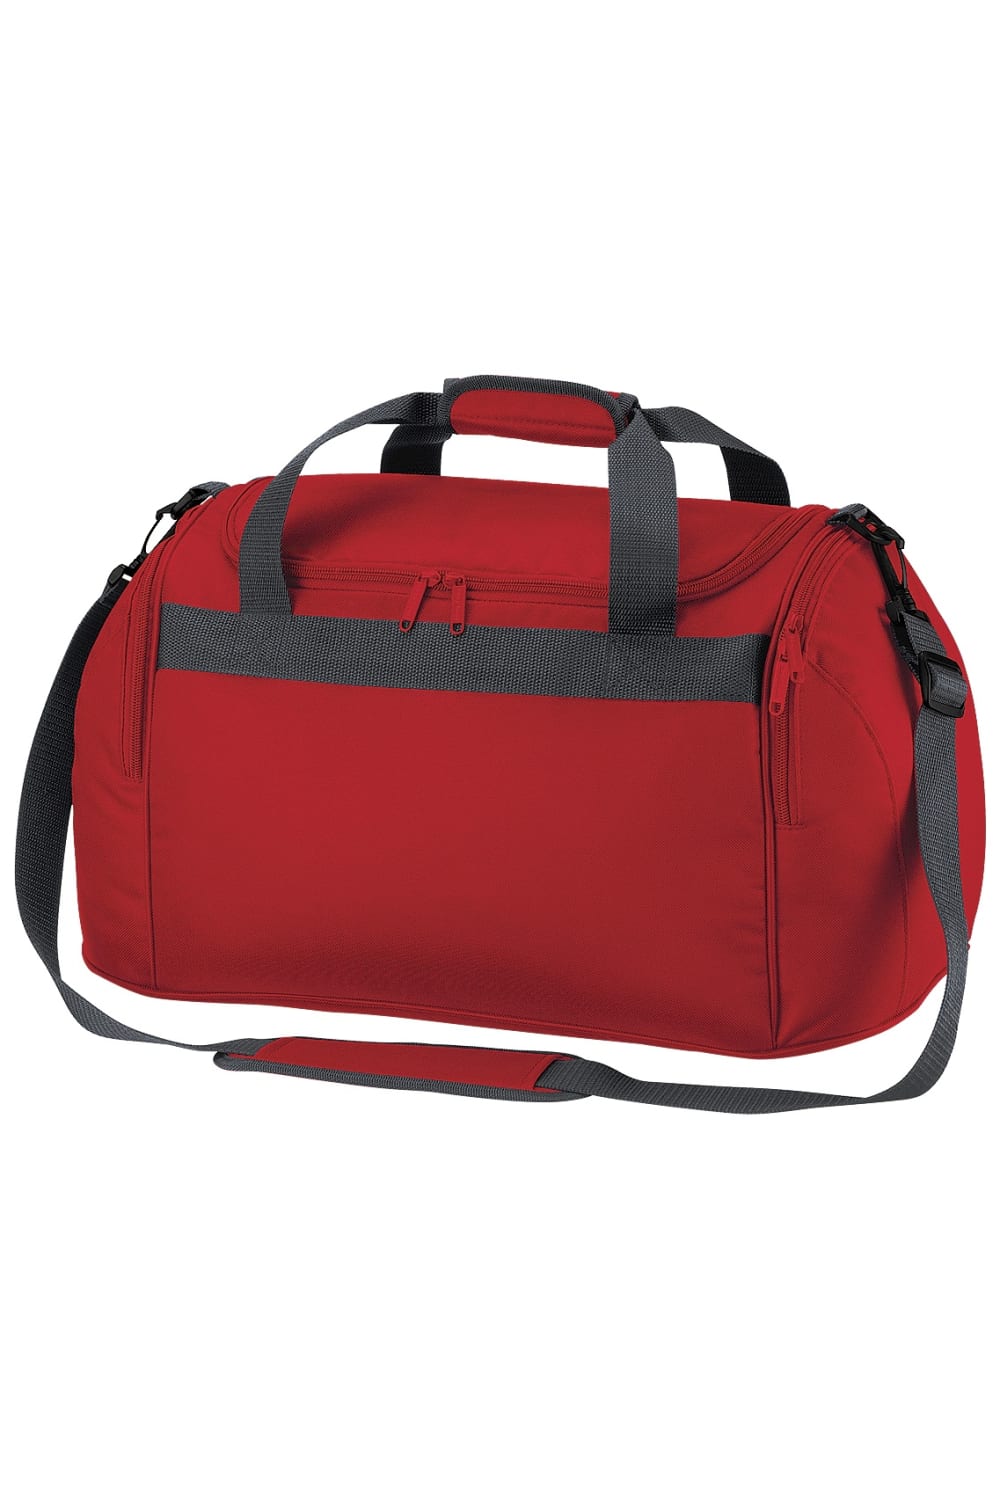 Freestyle Holdall / Duffel Bag (26 Liters) - Classic Red